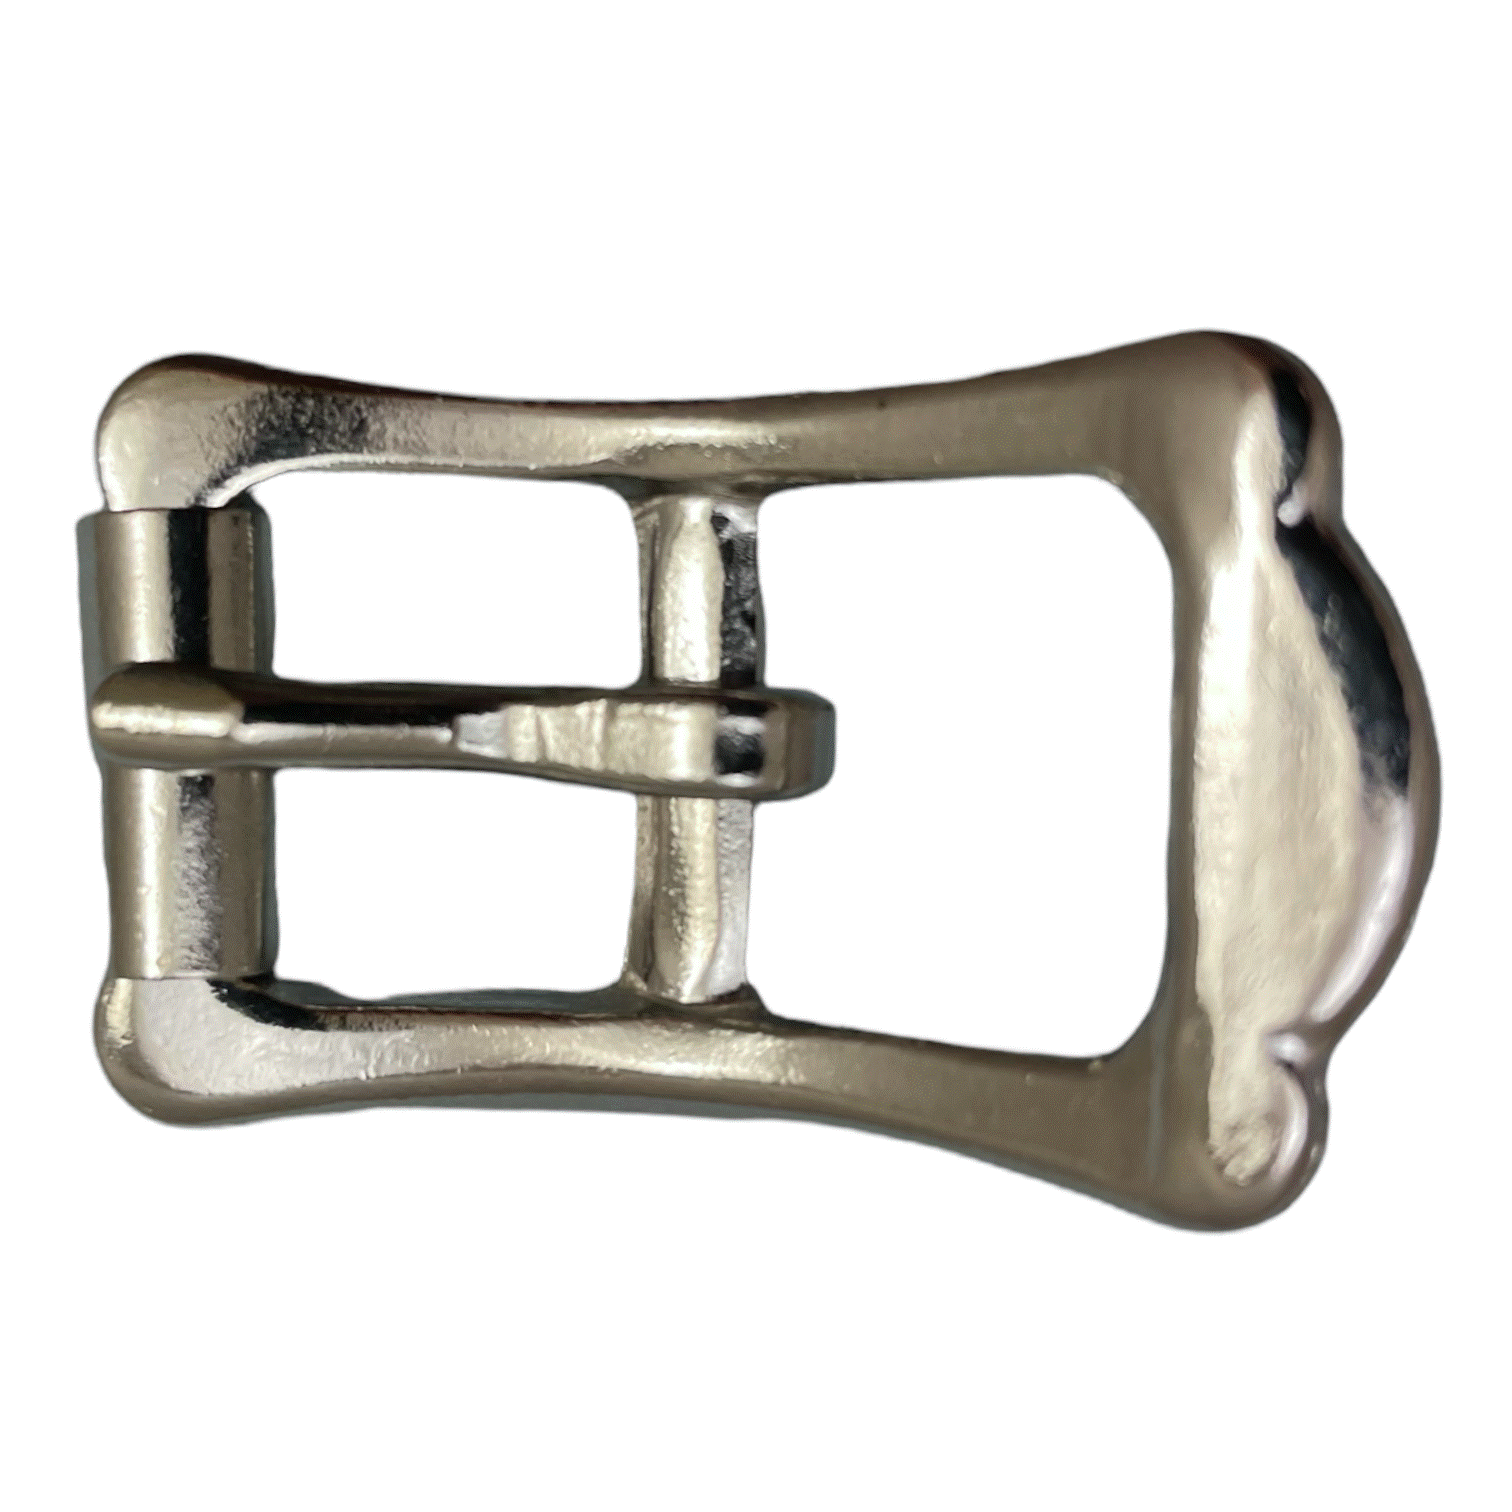 16 mm Vic Roller Buckle - Nickel | Mac-Lace Leather | Buy Online